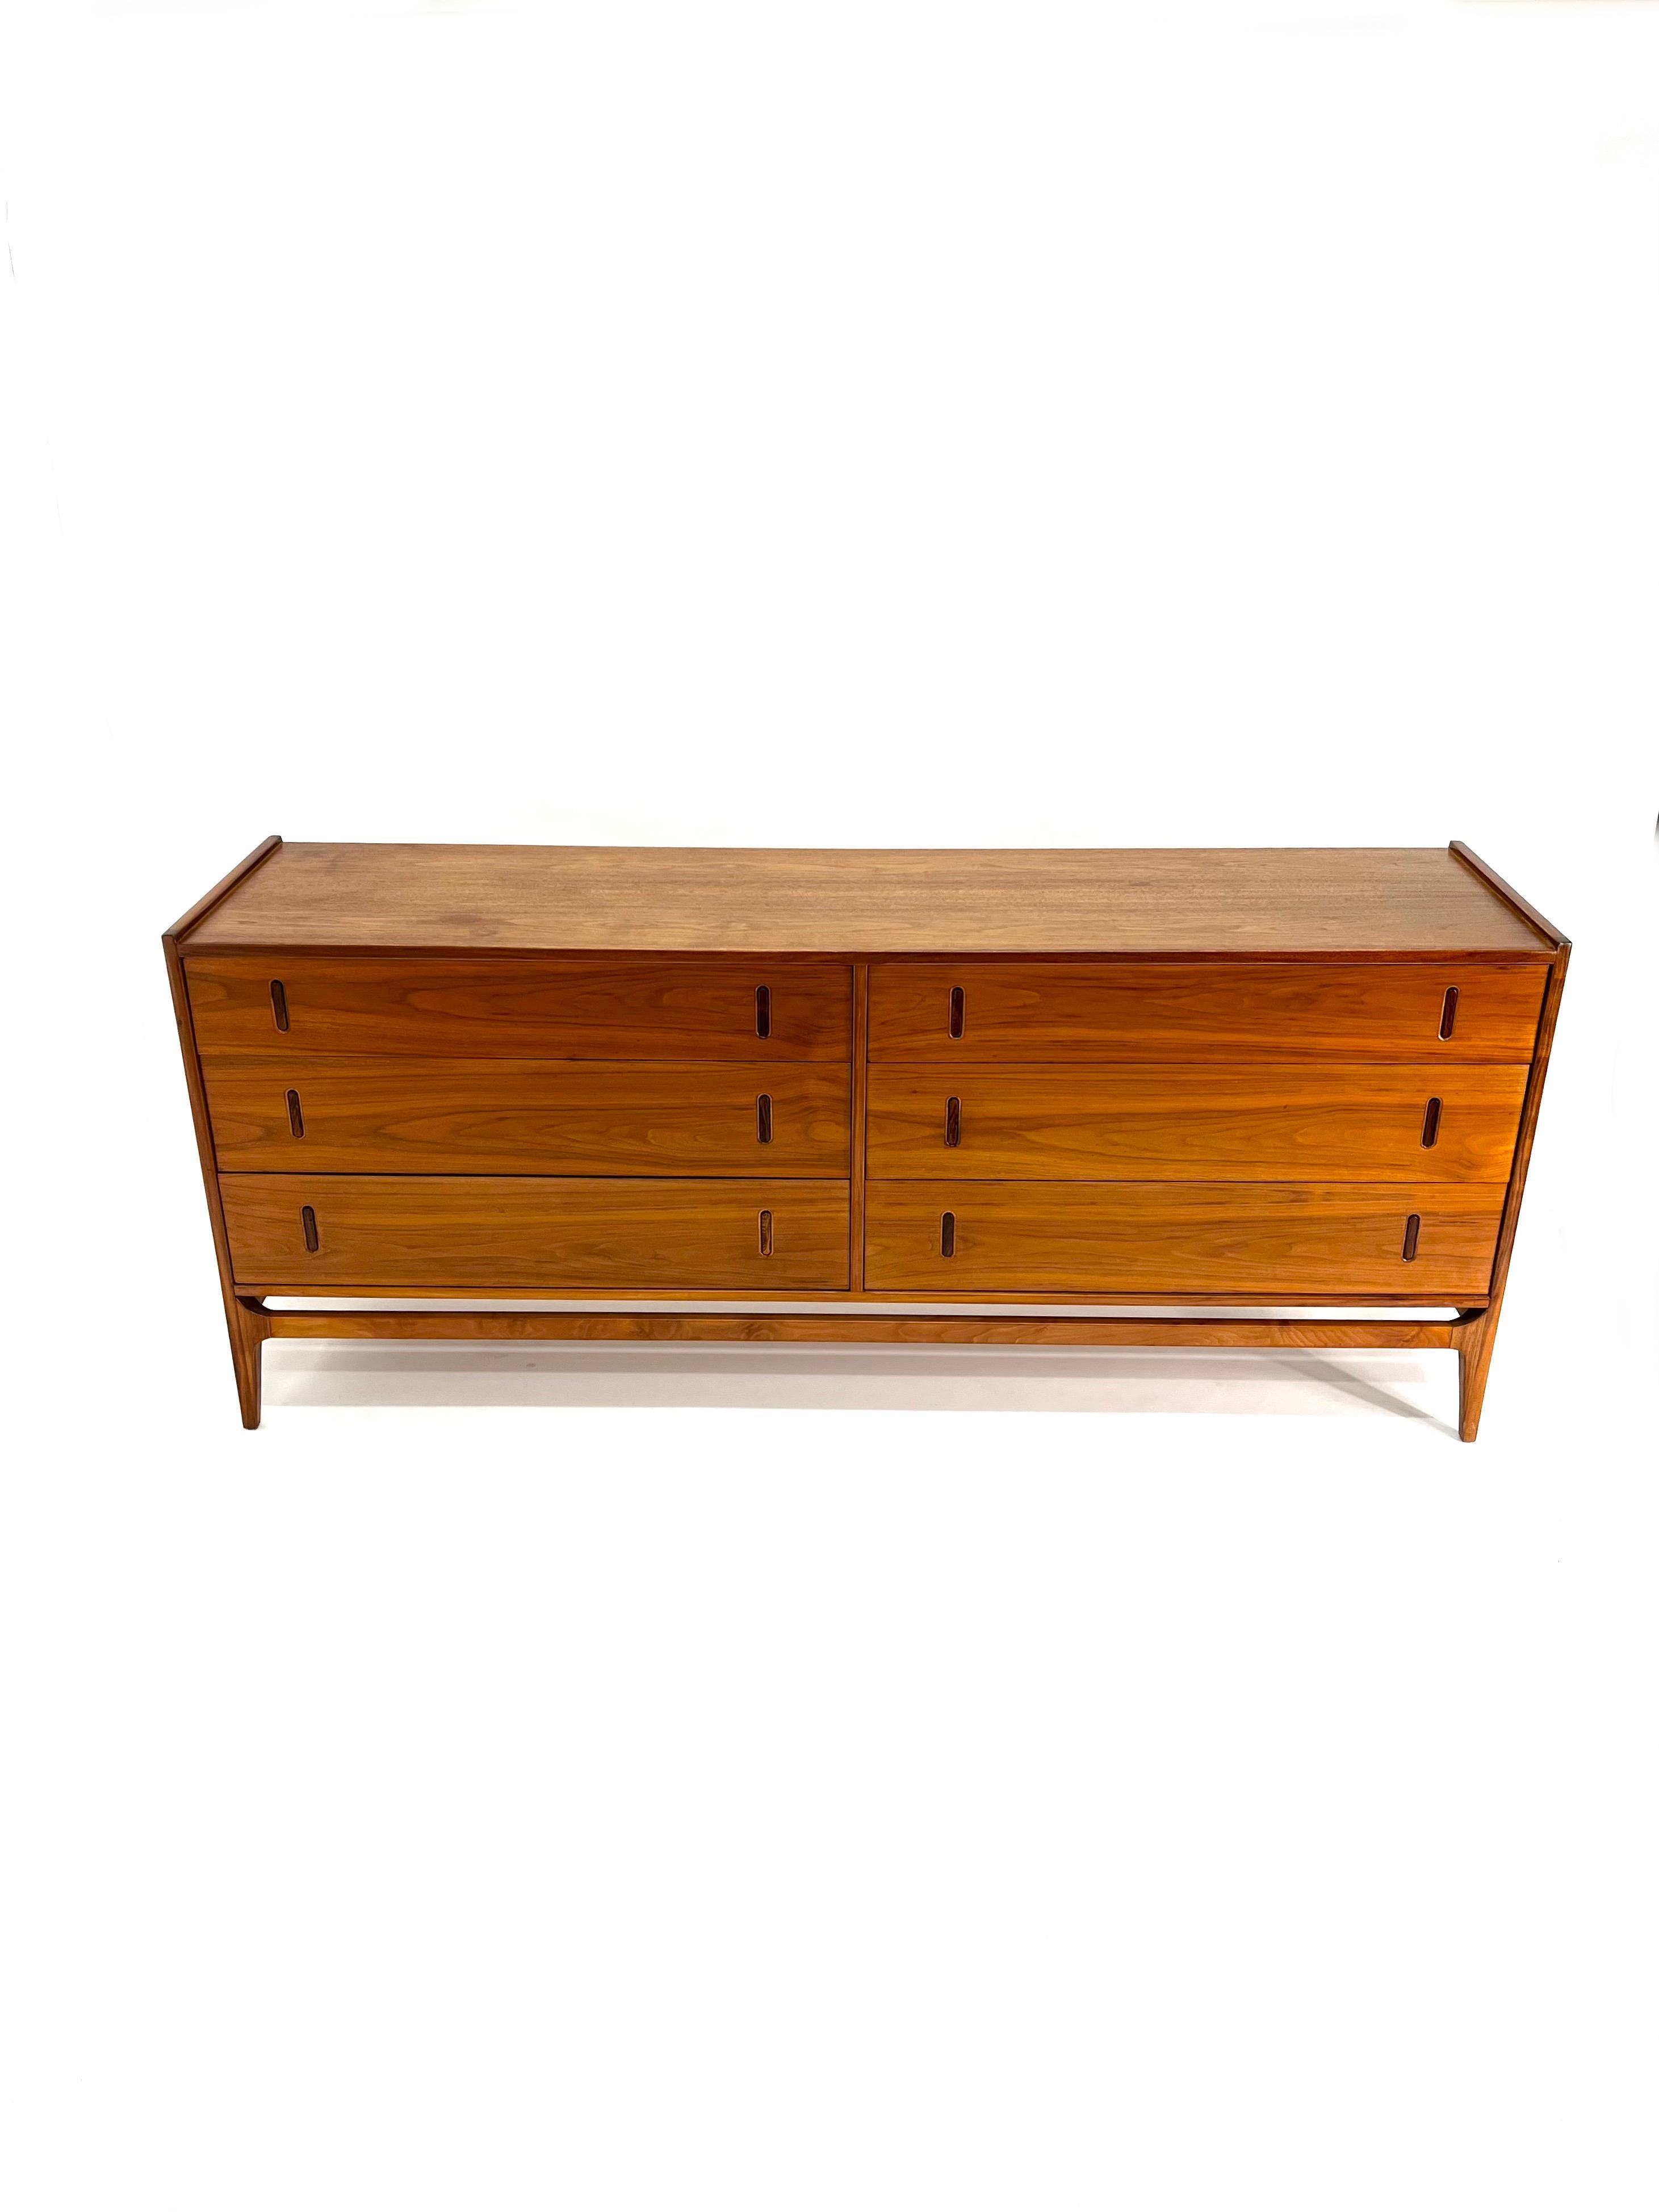 This incredible 6 drawer dresser was designed by Richard Thompson for Glenn of California circa 1950s. It has a sleek walnut wood case with integrated legs and retractable inlaid rosewood pulls, which pop out when the top is pushed. We are huge fans